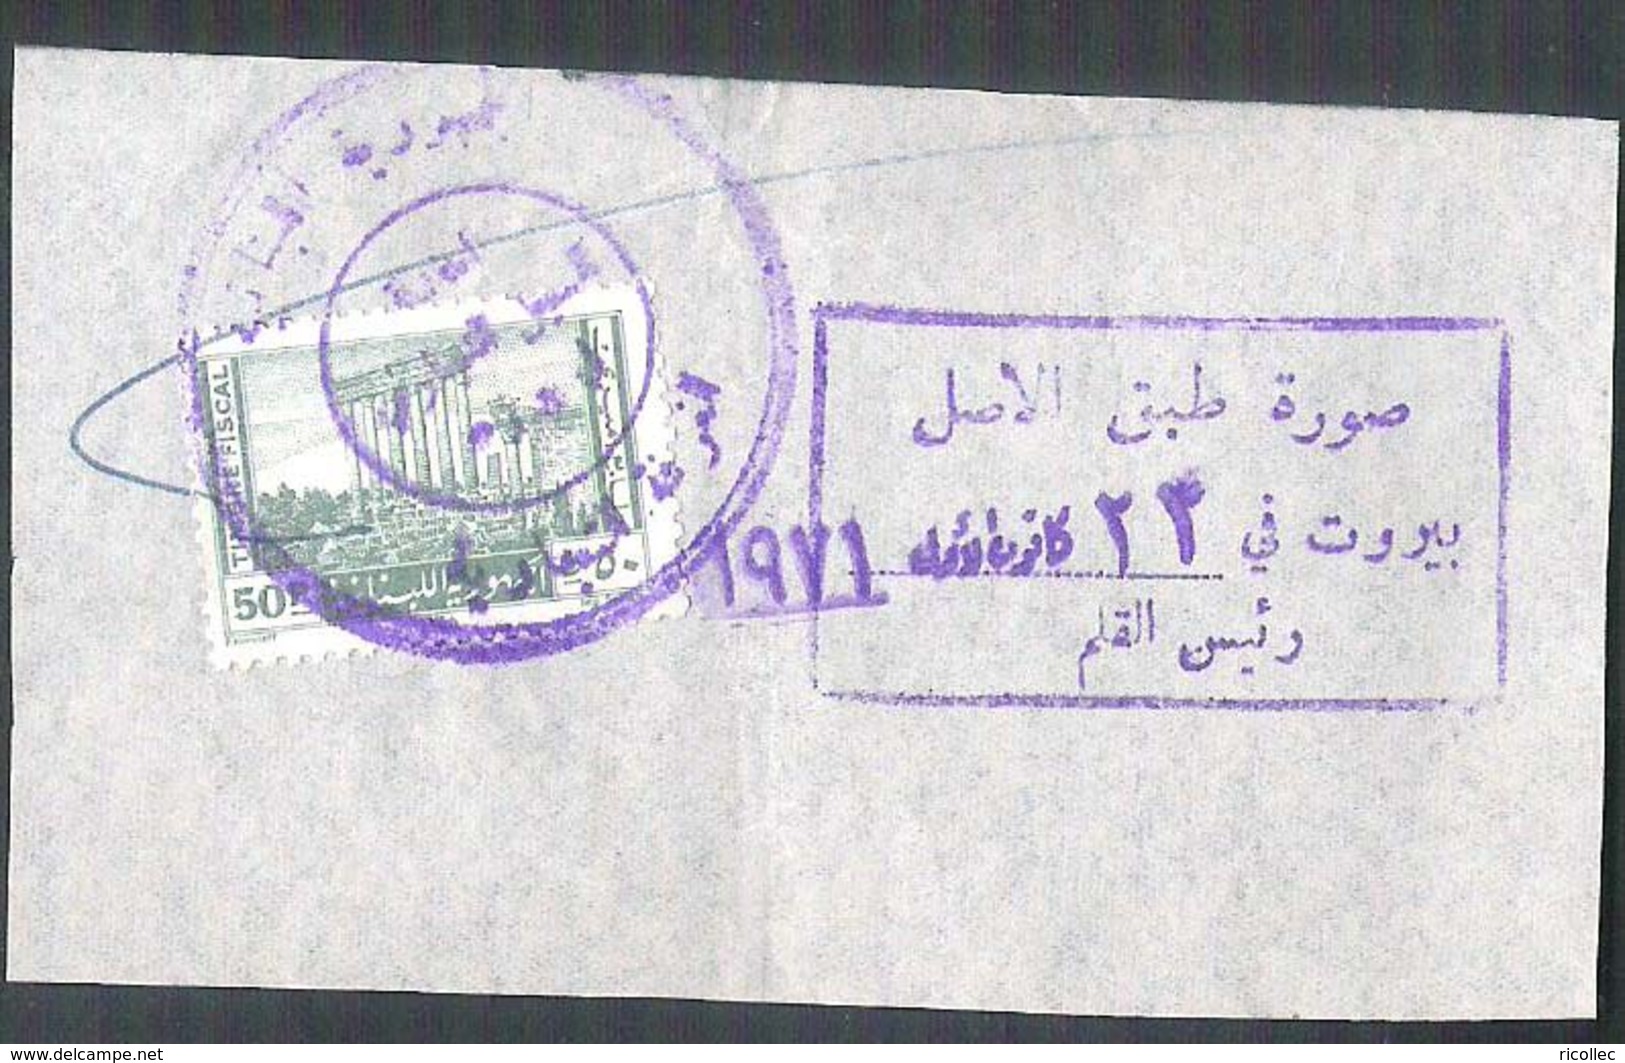 Fiscal Revenue Used Stamp On Paper 50 Piastres 1968 Baalbeck LEBANON LIBAN - Lebanon